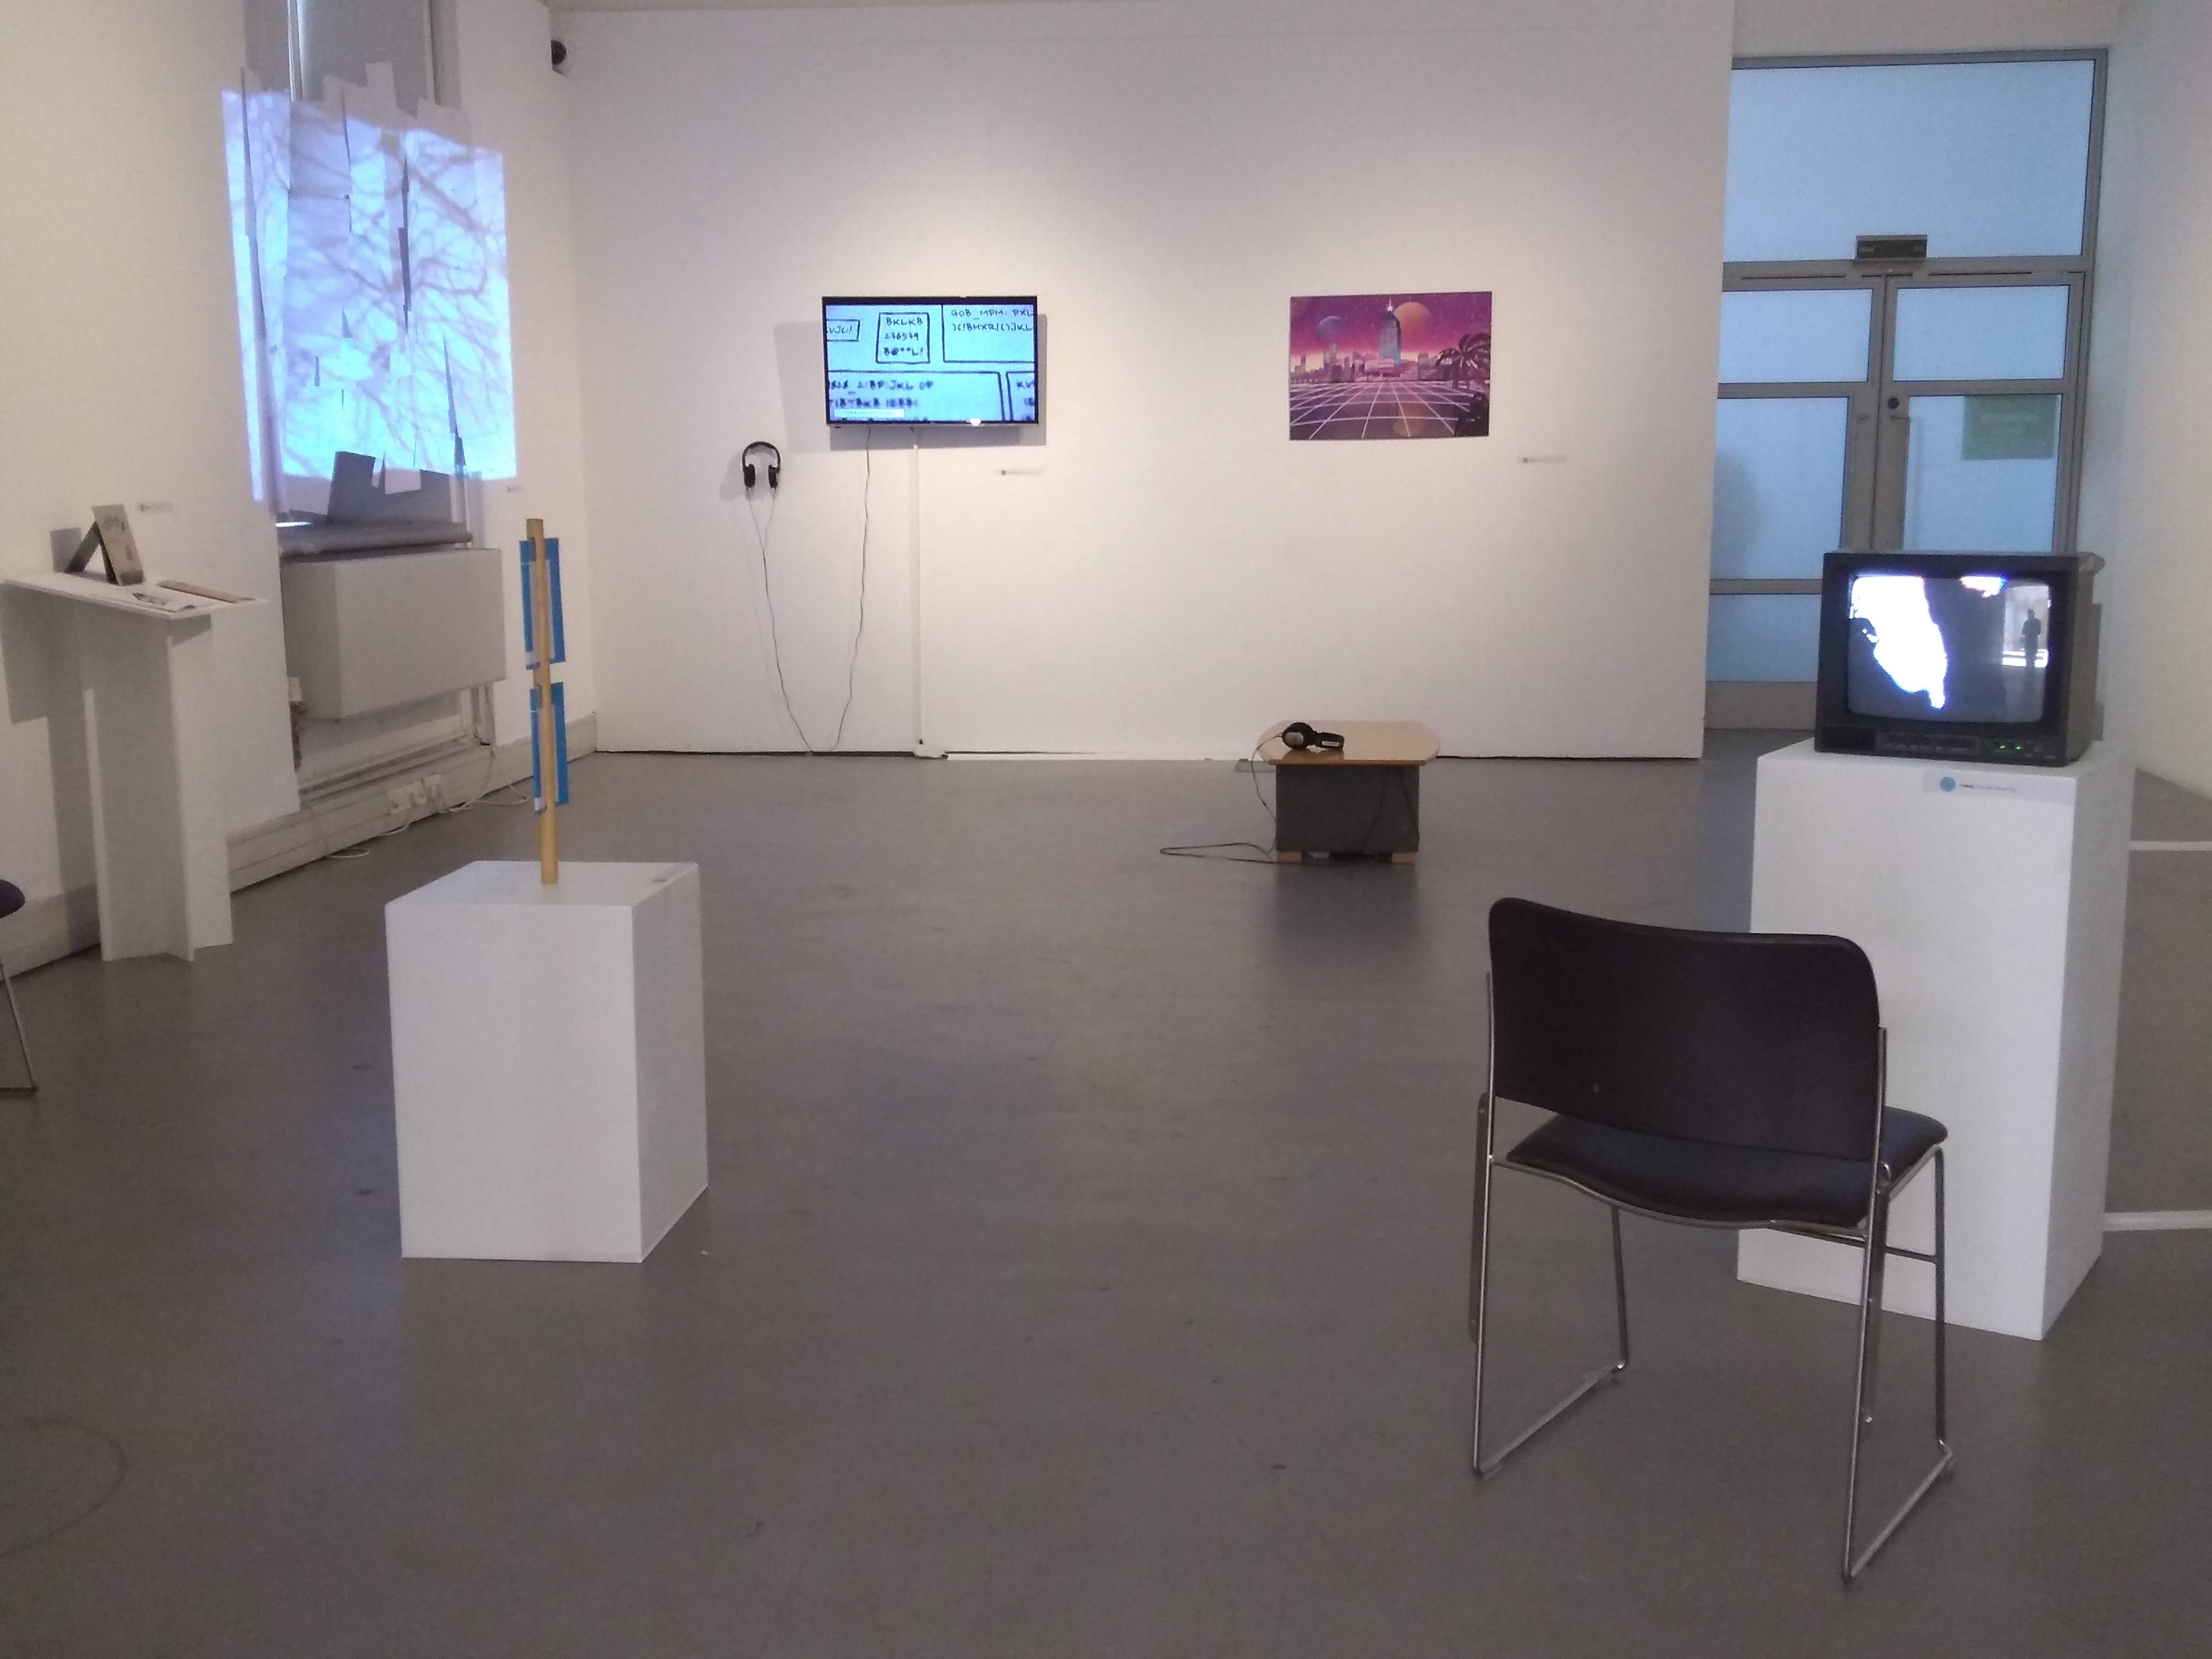 Photograph of works installed in 528 as seen from the entrance of the gallery